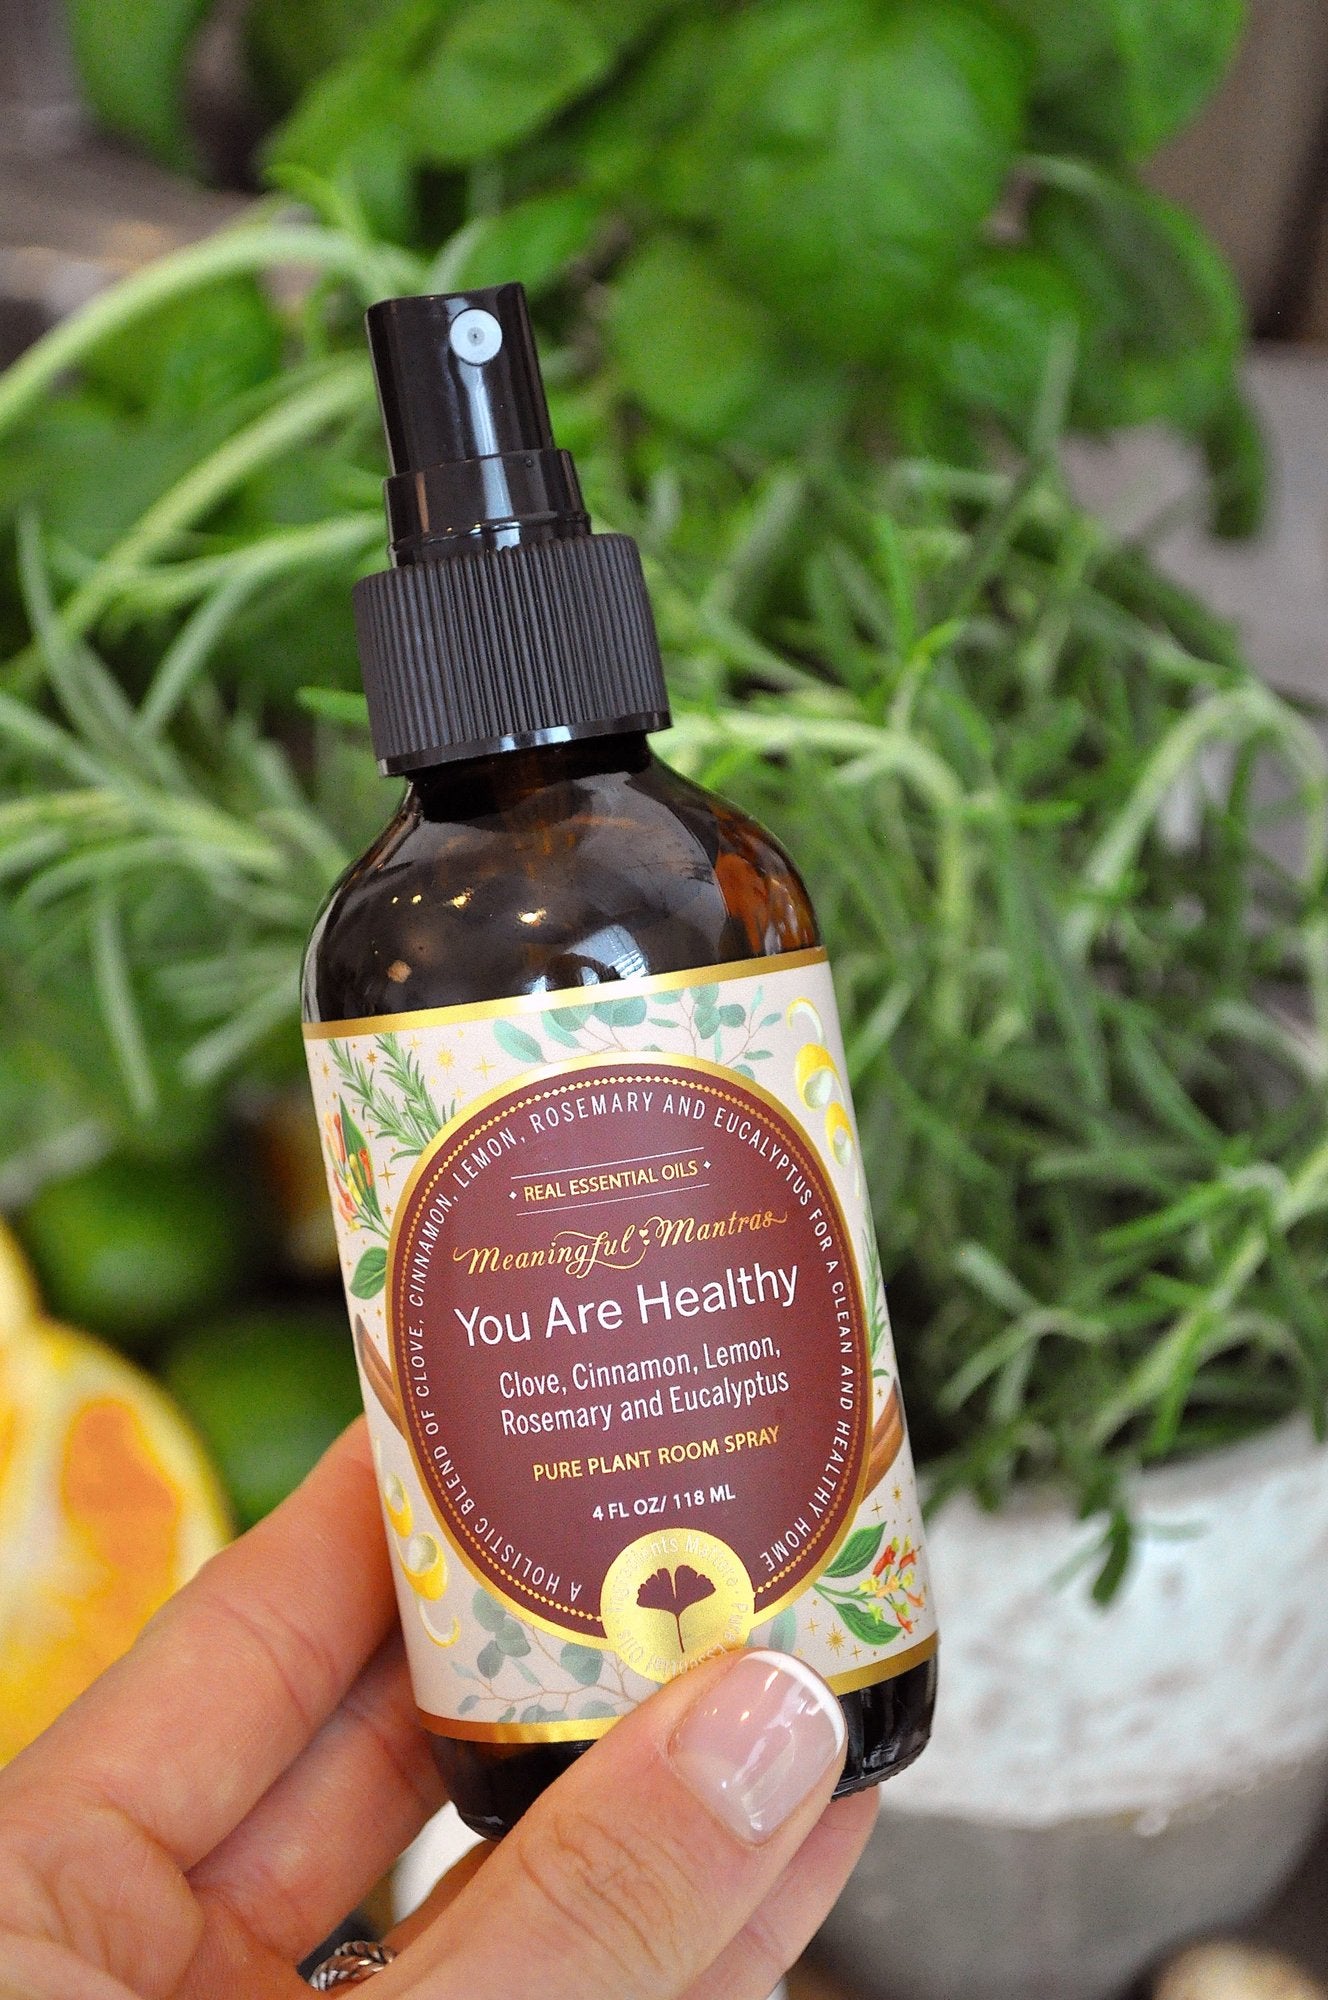 You Are Healthy Pure Plant Room Spray